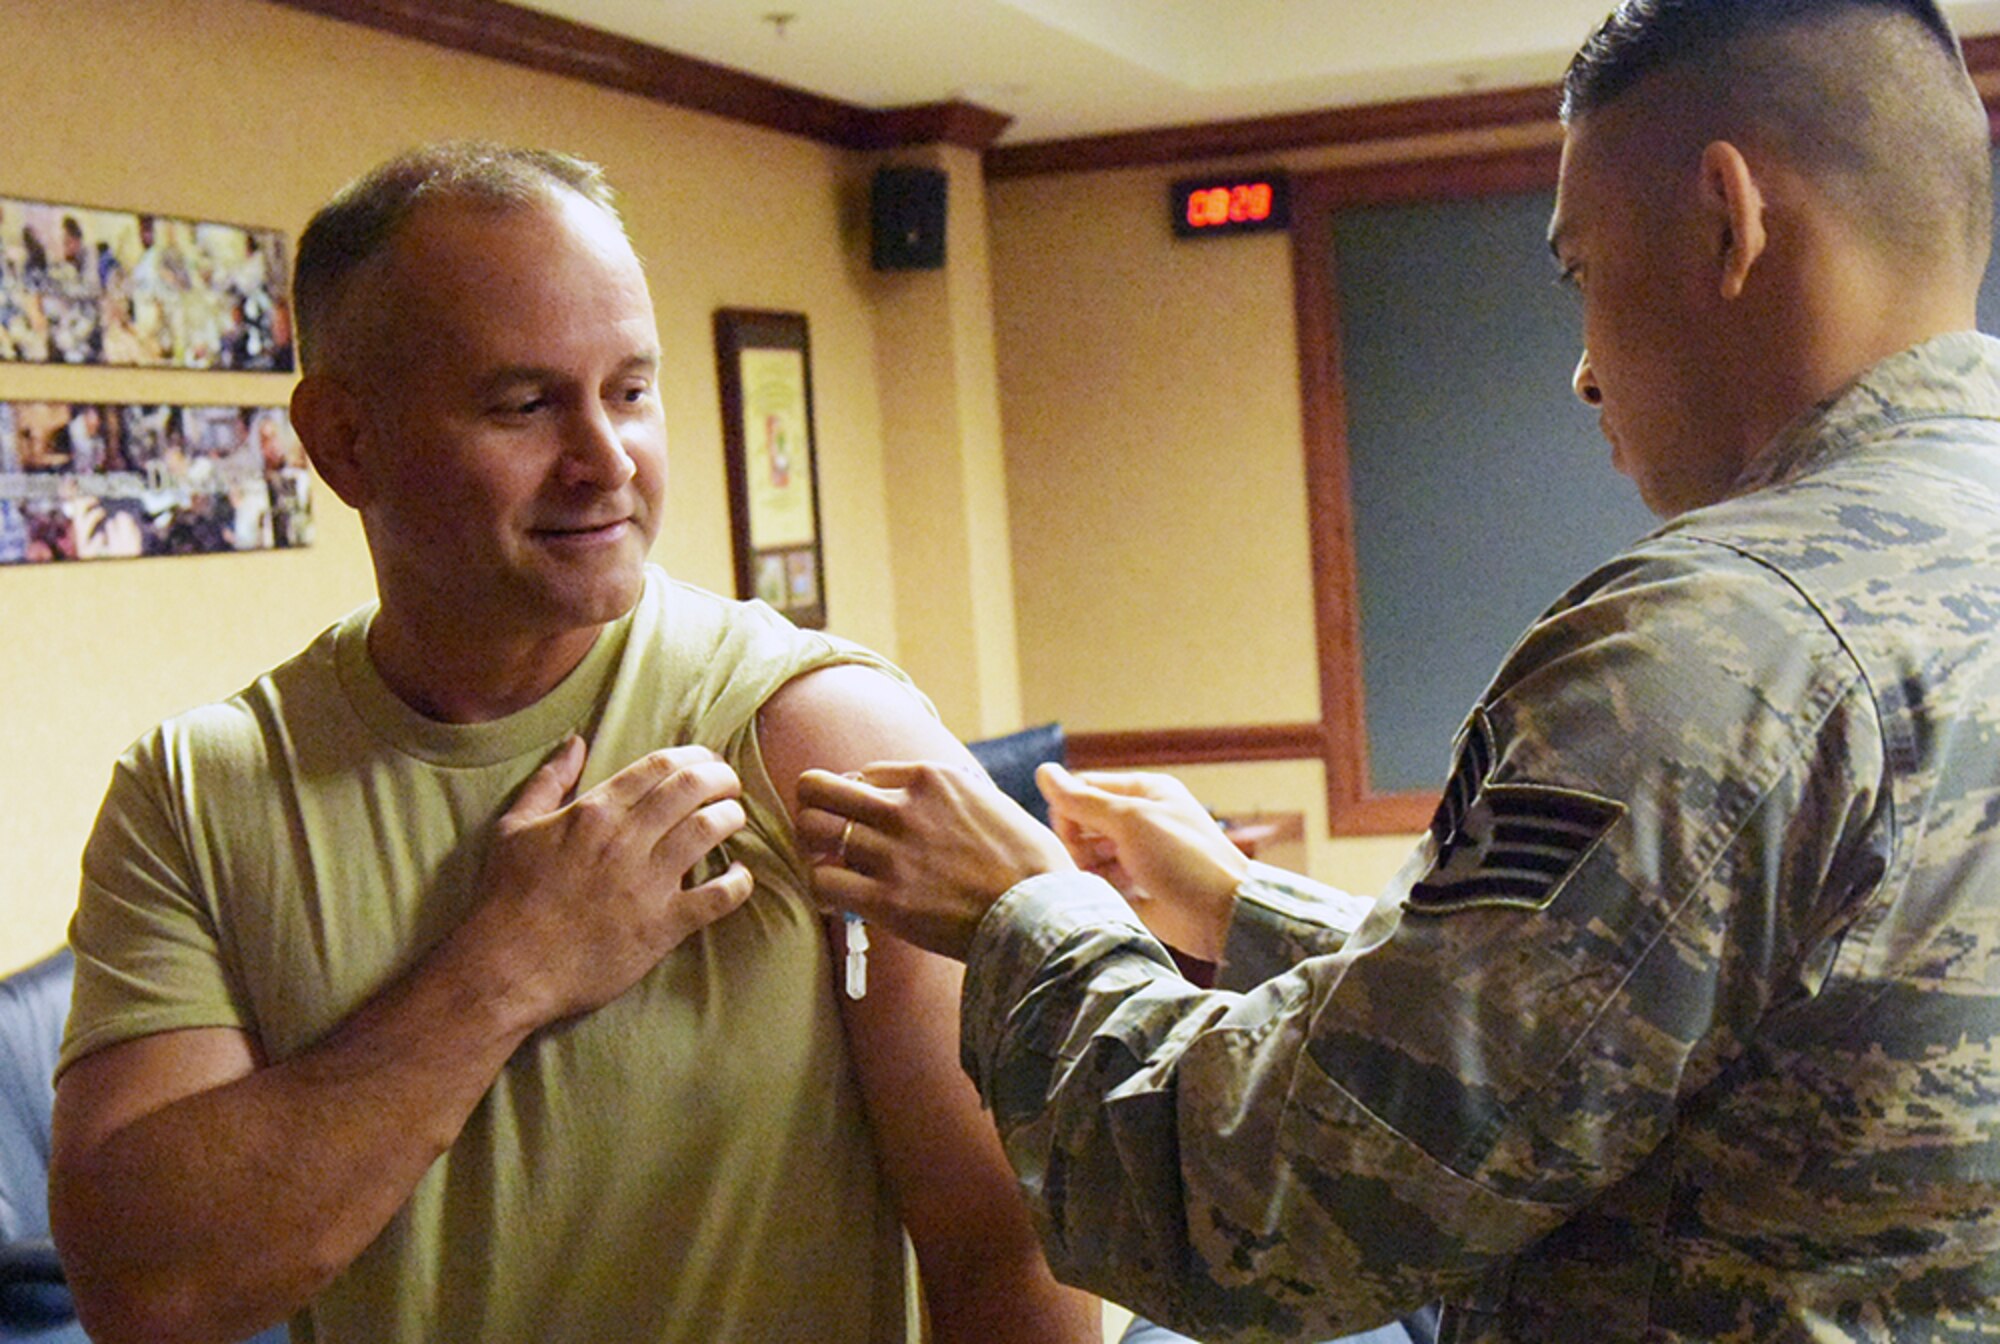 Staff Sgt. Tam Nguyen, 78th Medical Group Immunization Clinic noncommissioned officer in charge, administers a flu shot to Chief Master Sergeant Emilio Hernandez, 78th ABW command chief. The Influenza vaccine is here and available for all TRICARE beneficiaries. The goal is to have 90 percent of the active duty and Reserve population vaccinated by Dec. 15. Group commanders and first sergeants will coordinate with the immunization clinic to schedule a point of distribution to administer the vaccine within their groups. There is no need to schedule an appointment, walk-ins are accepted in the immunization clinic, Mondays through Fridays from 7:30 a.m. to 4:30 p.m. (U.S. Air Force photo/RAYMOND CRAYTON, JR.)